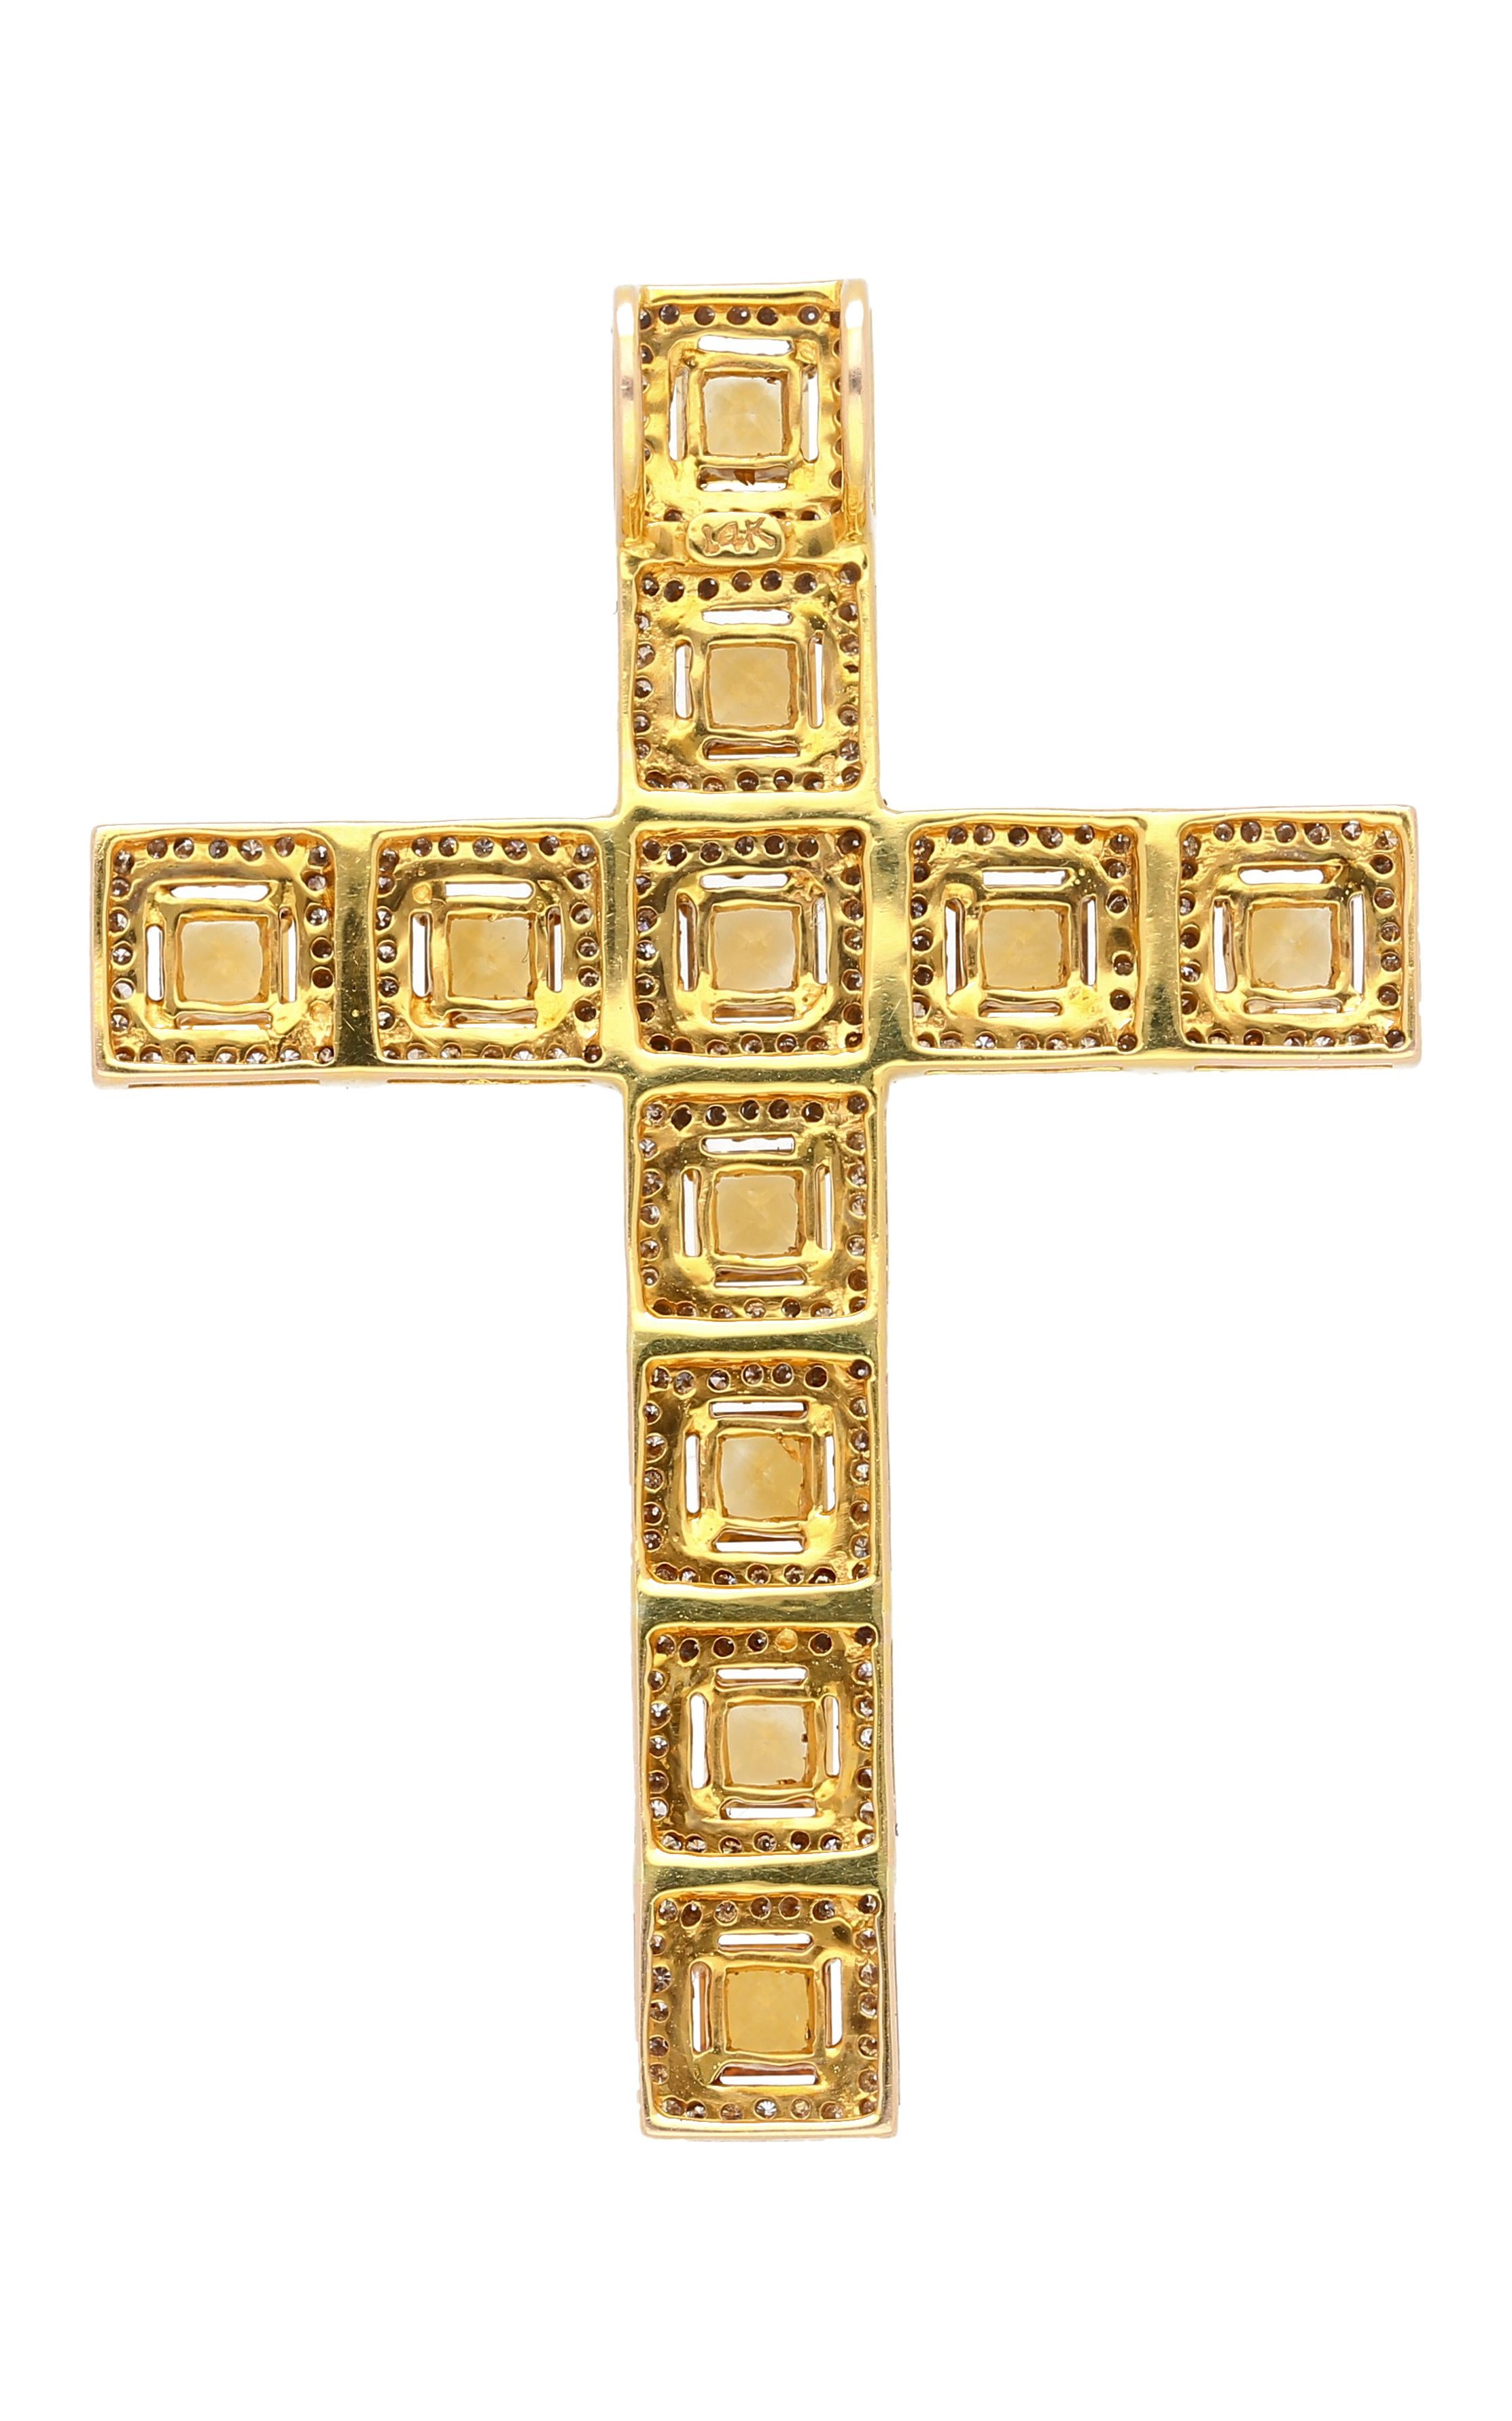 This captivating 14k yellow gold cross pendant features a mesmerizing 2.33 carats total of princess cut yellow sapphires, encompassed by a white diamond halo. A cross motif pendant that dazzles with every facet. 

Details: 
✔ Item type: Pendant 
✔